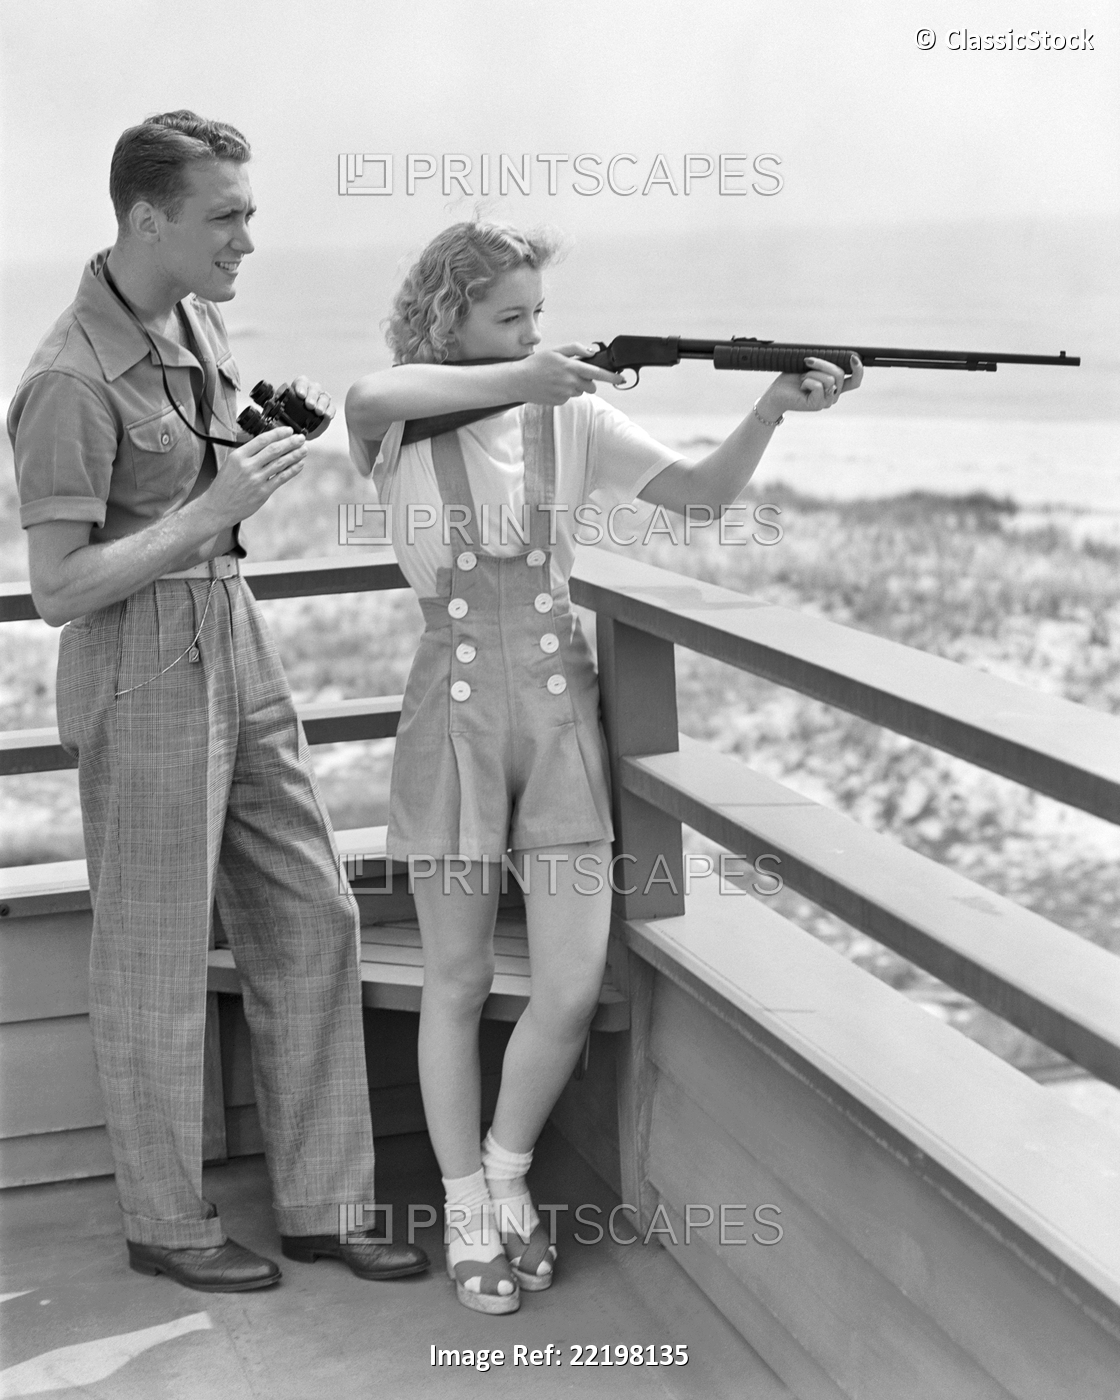 1940s YOUNG COUPLE SHOOTING 22 CALIBER PUMP RIFLE ATTRACTIVE BLOND WOMAN AIMING ...